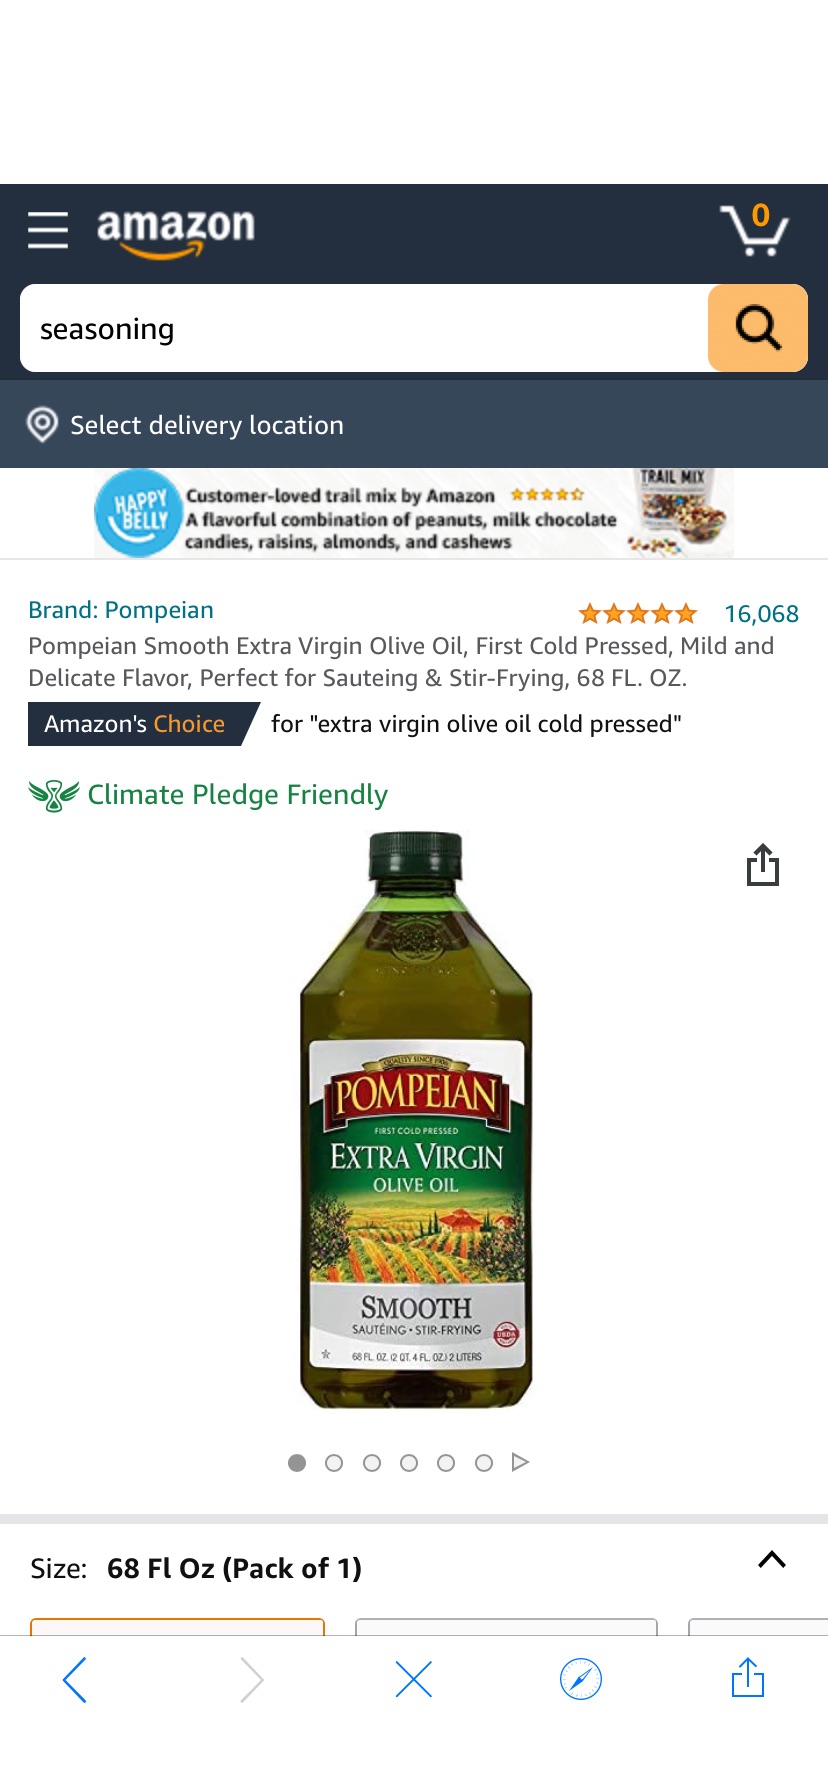 Amazon.com : Pompeian Smooth 橄榄油Extra Virgin Olive Oil, First Cold Pressed, Mild and Delicate Flavor, Perfect for Sauteing & Stir-Frying, 68 FL. OZ. : Grocery & Gourmet Food